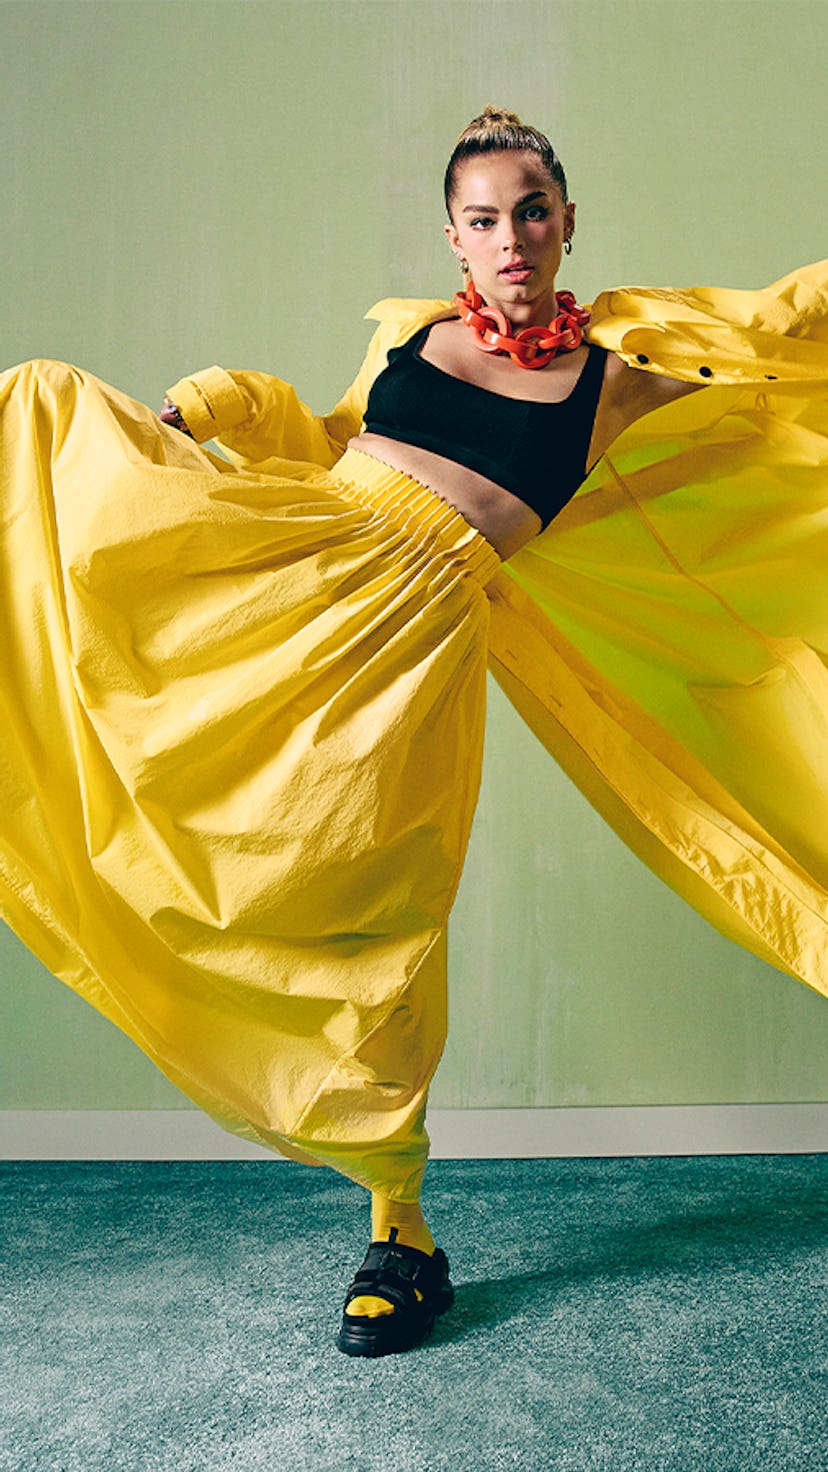 TikTok star Addison Rae wears a yellow outfit as she appears on Bustle's cover.